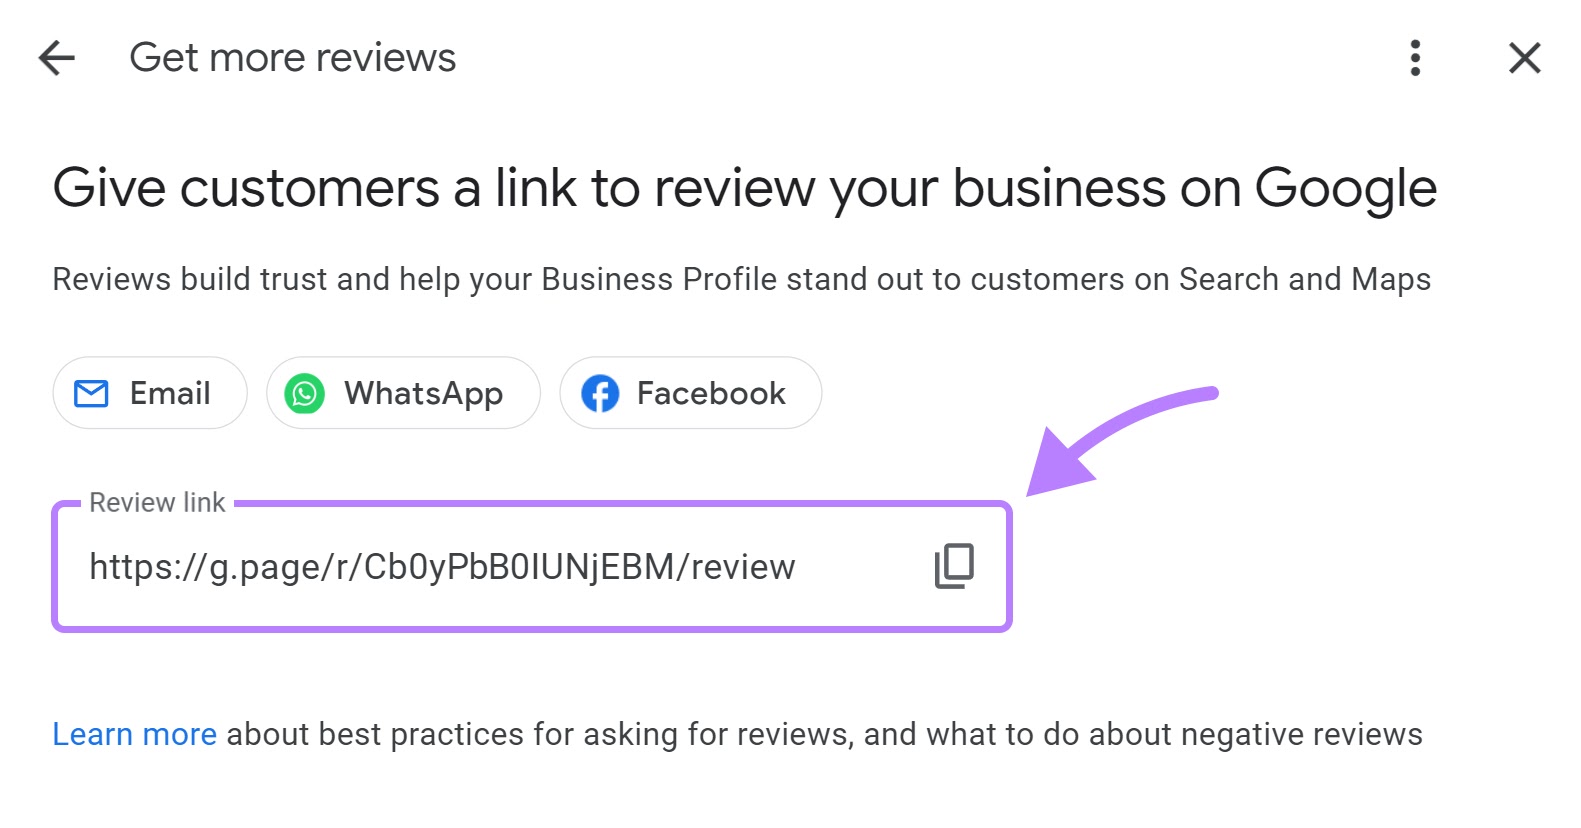 A unique link for a GBP listing that can be shared with customers to review the business on Google.